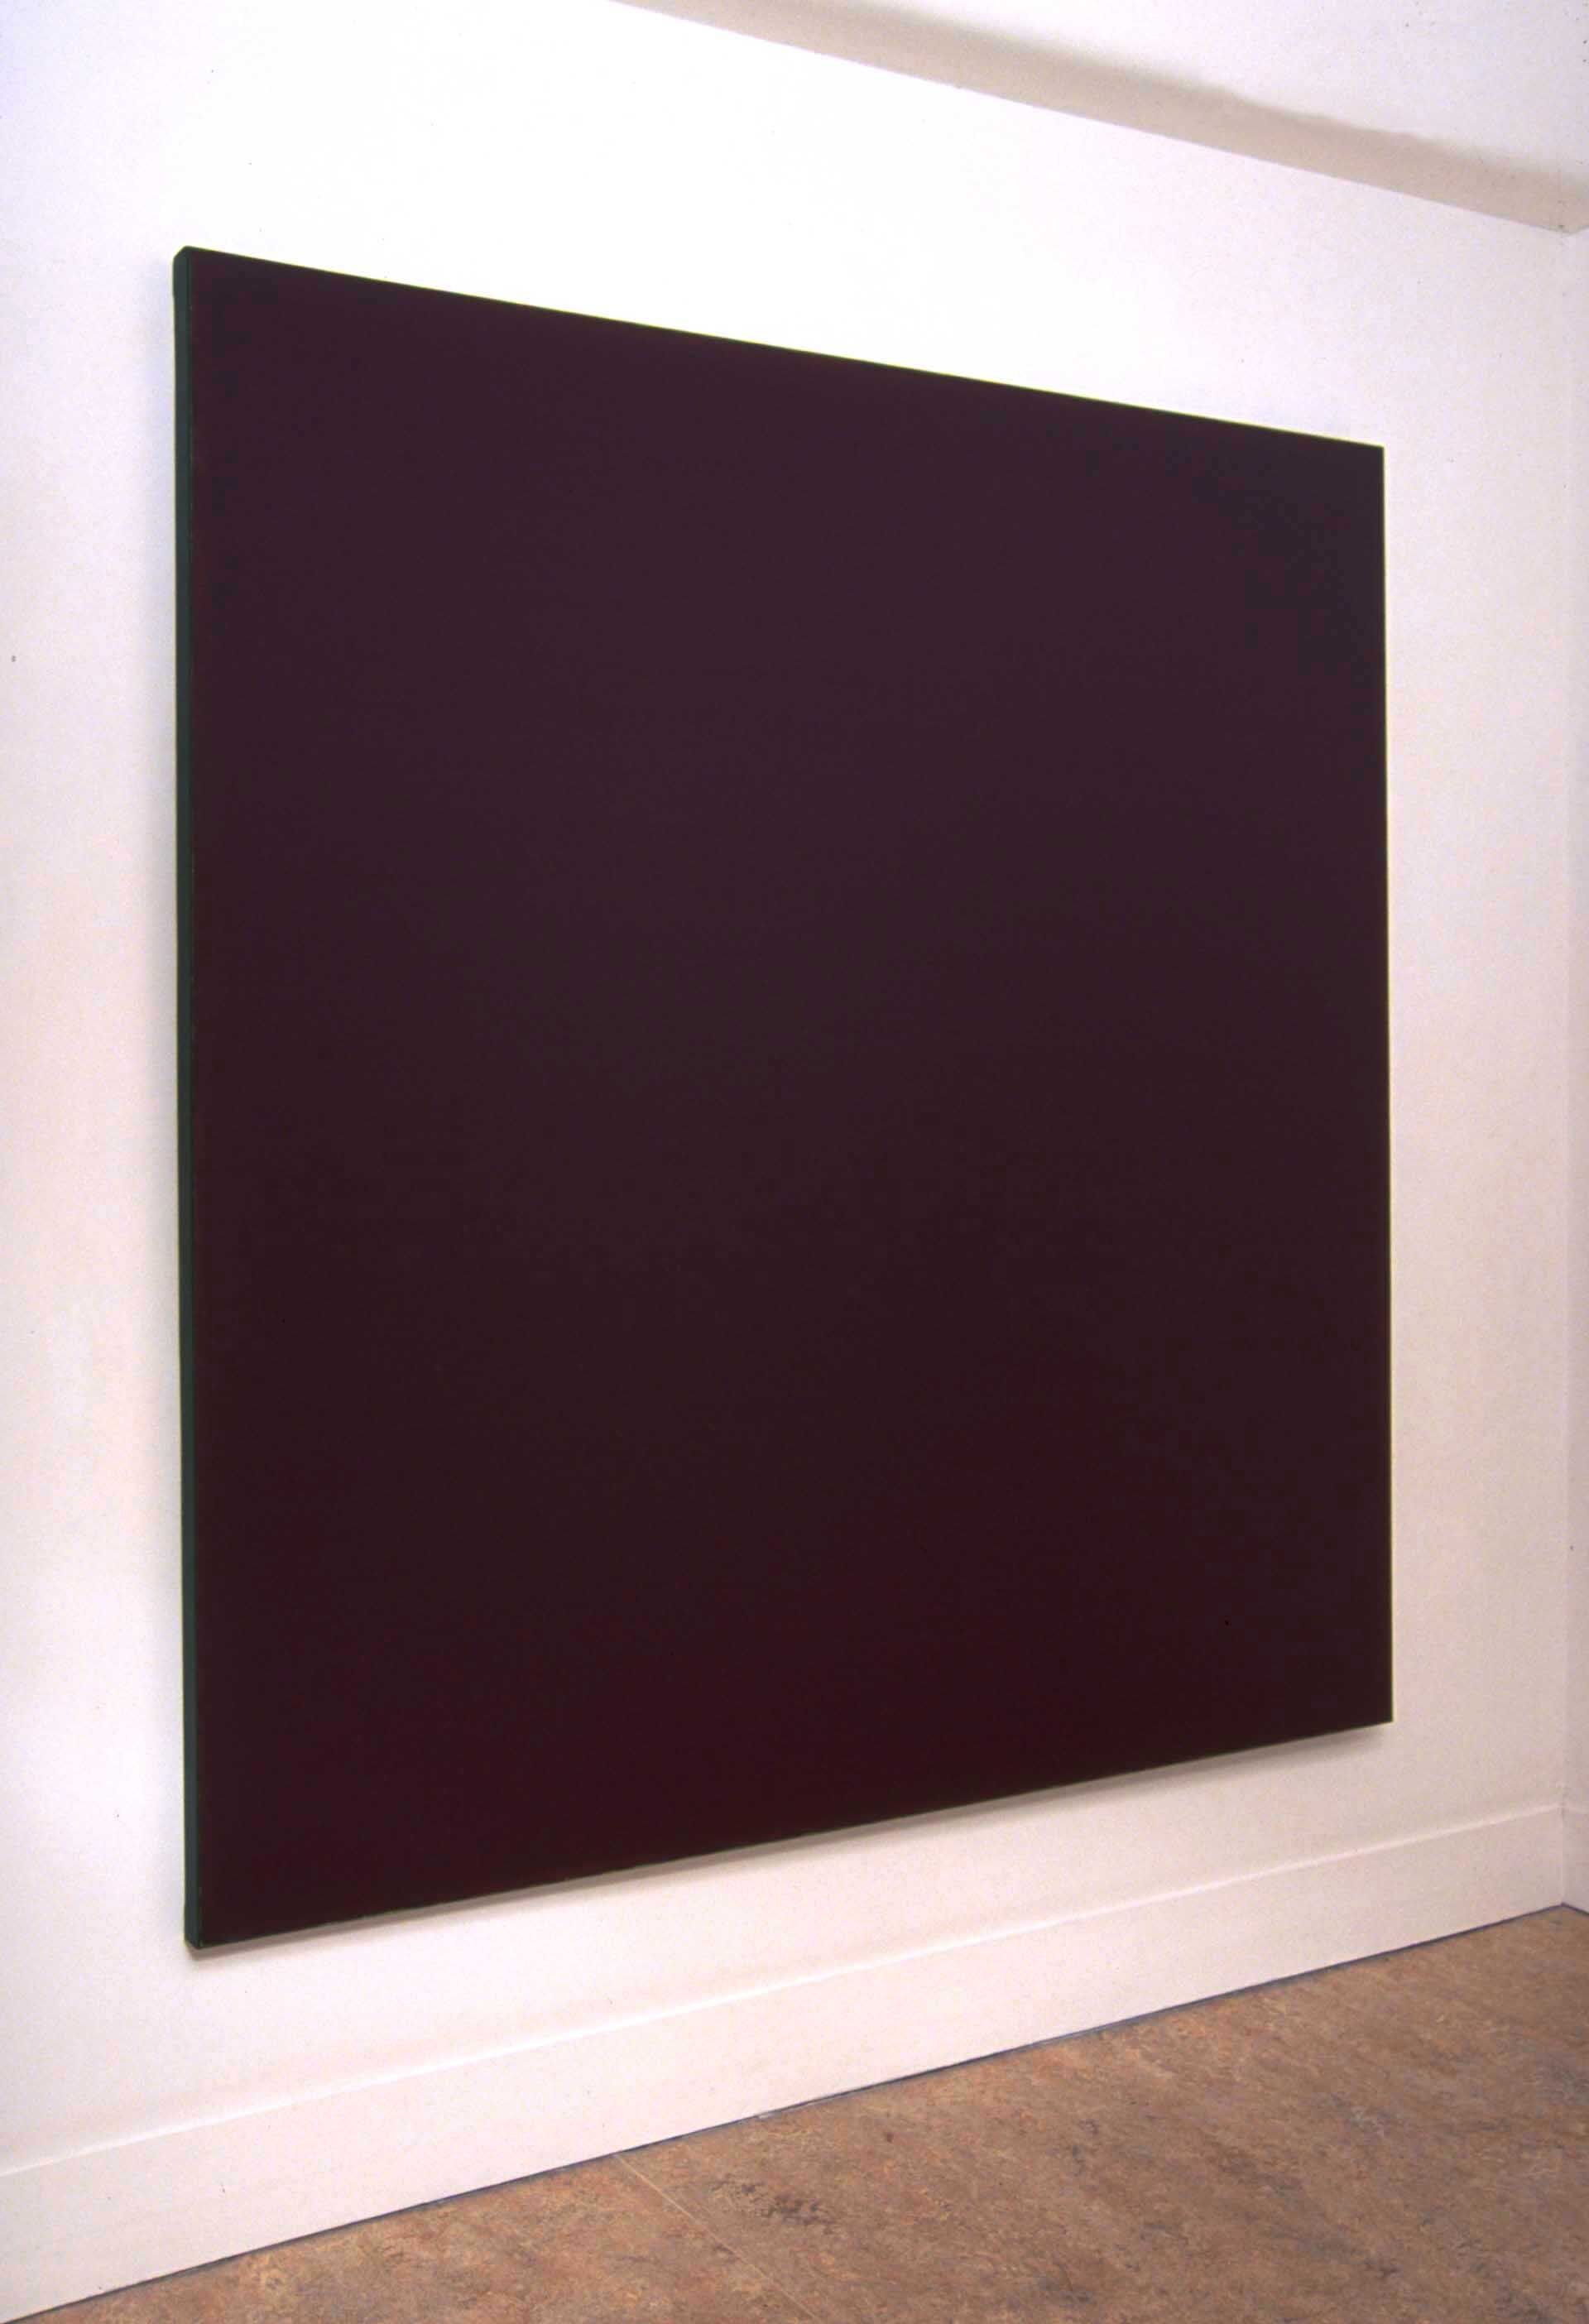 An illusion of indifference, 2002